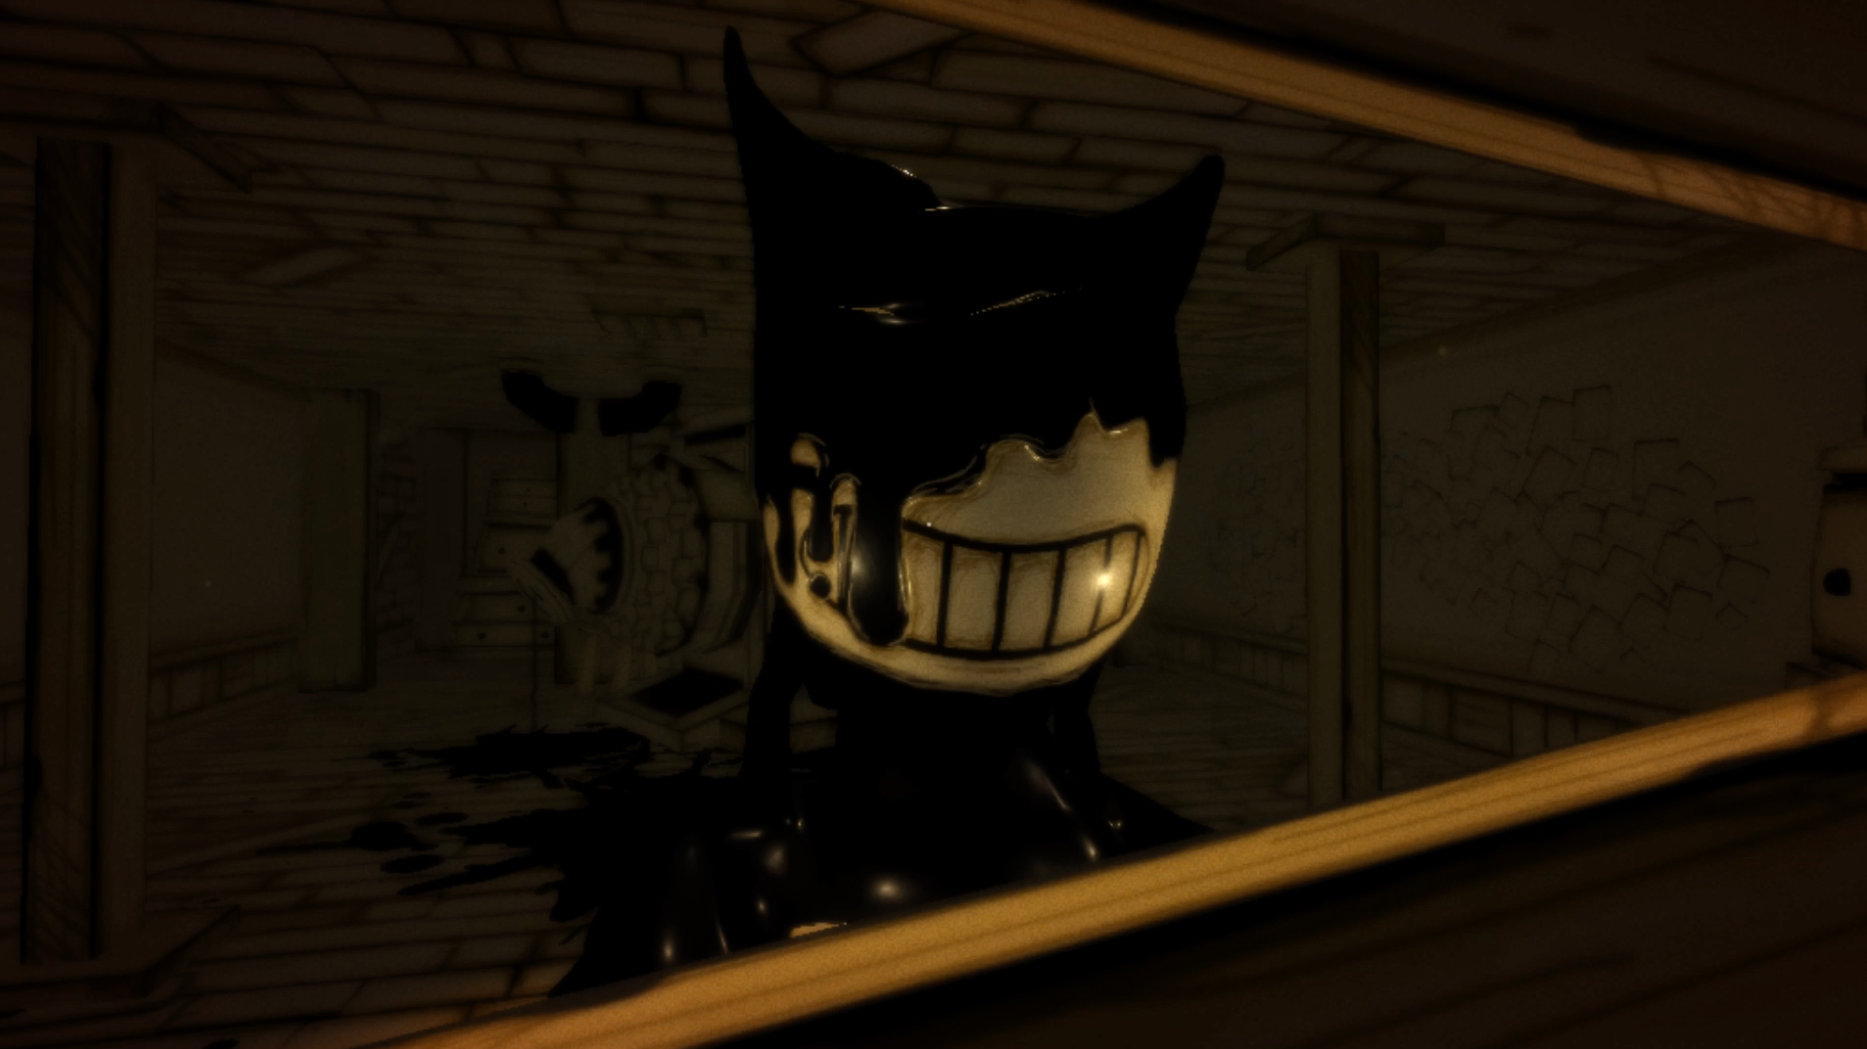 Bendy and the ink machine 1.1.2 Beta THE FIRST BETA MACOS PORT! by